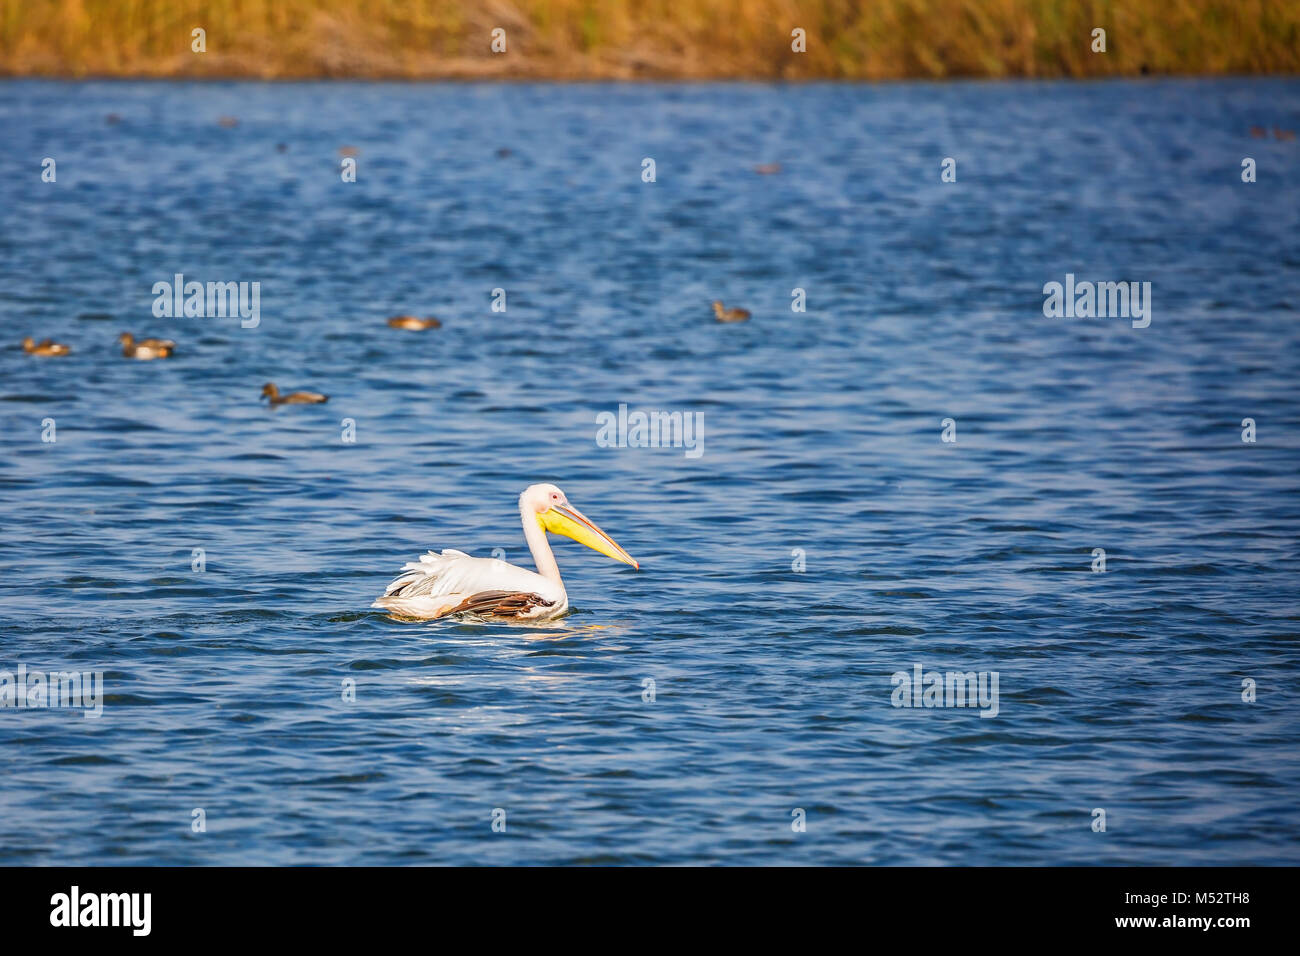 Great pelican swims in the blue water lake Stock Photo